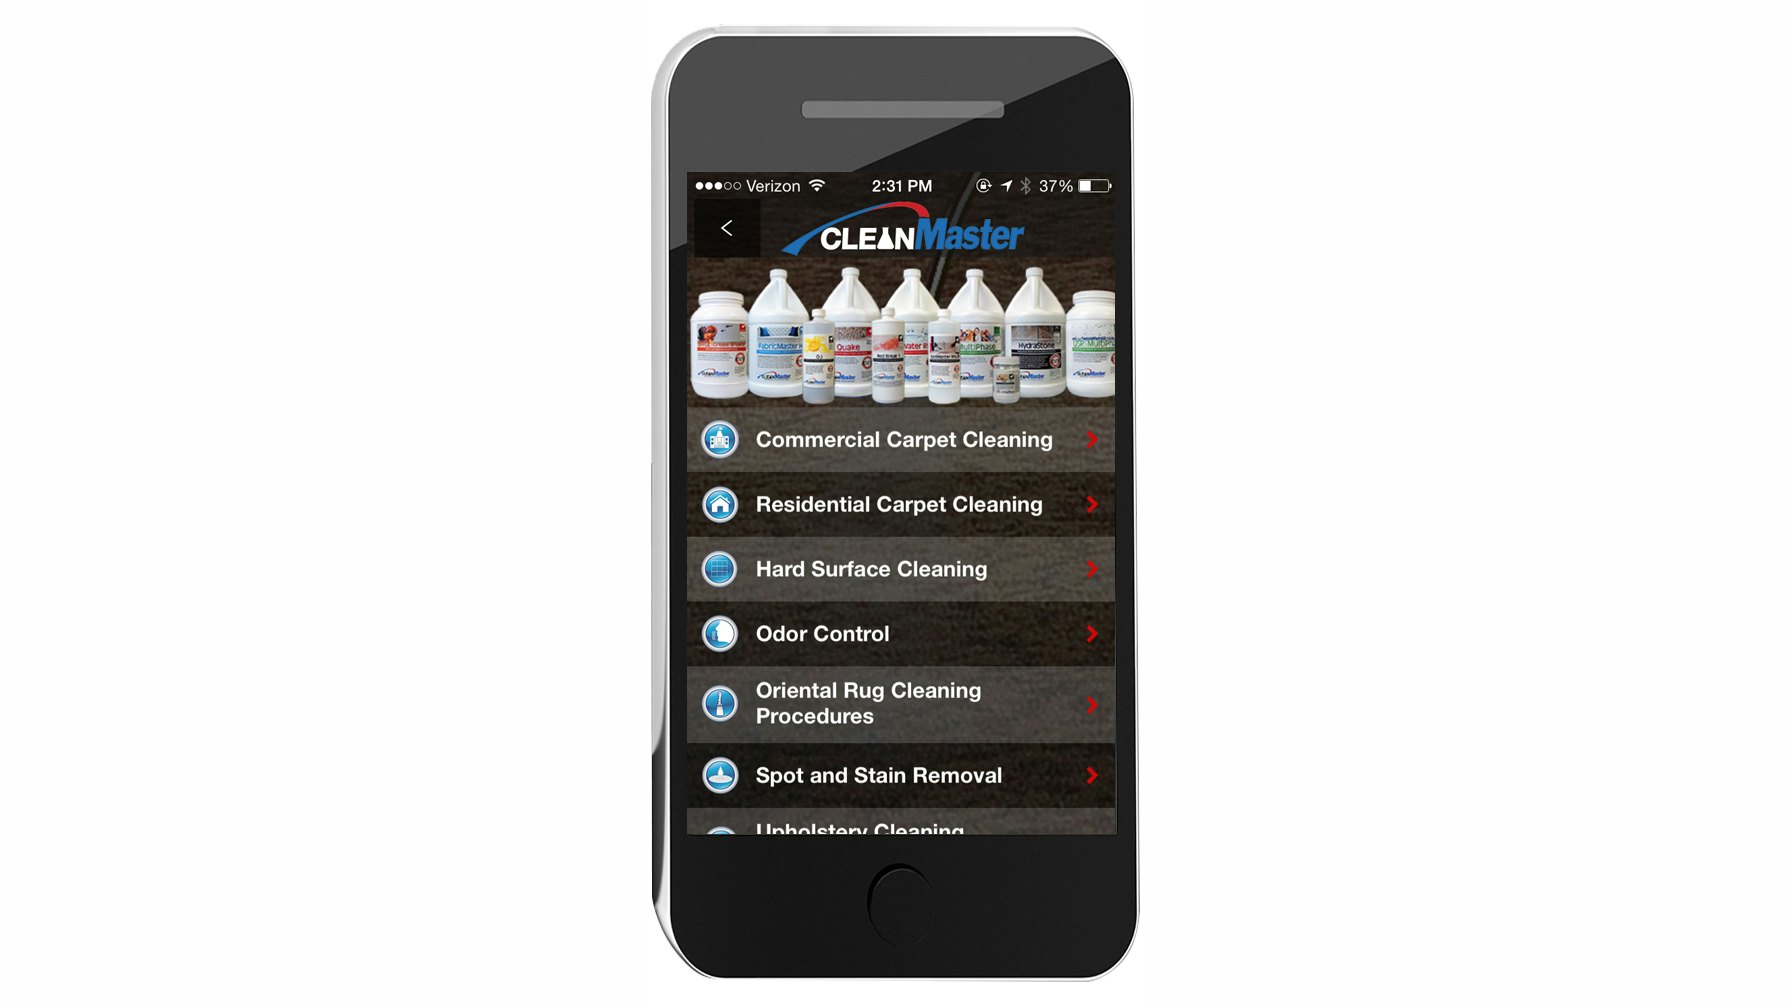 Hydramaster Introduces Cleanmaster Solutions Smart Phone Tablet App For Cleaners And Restorers From Hydramaster For Construction Pros